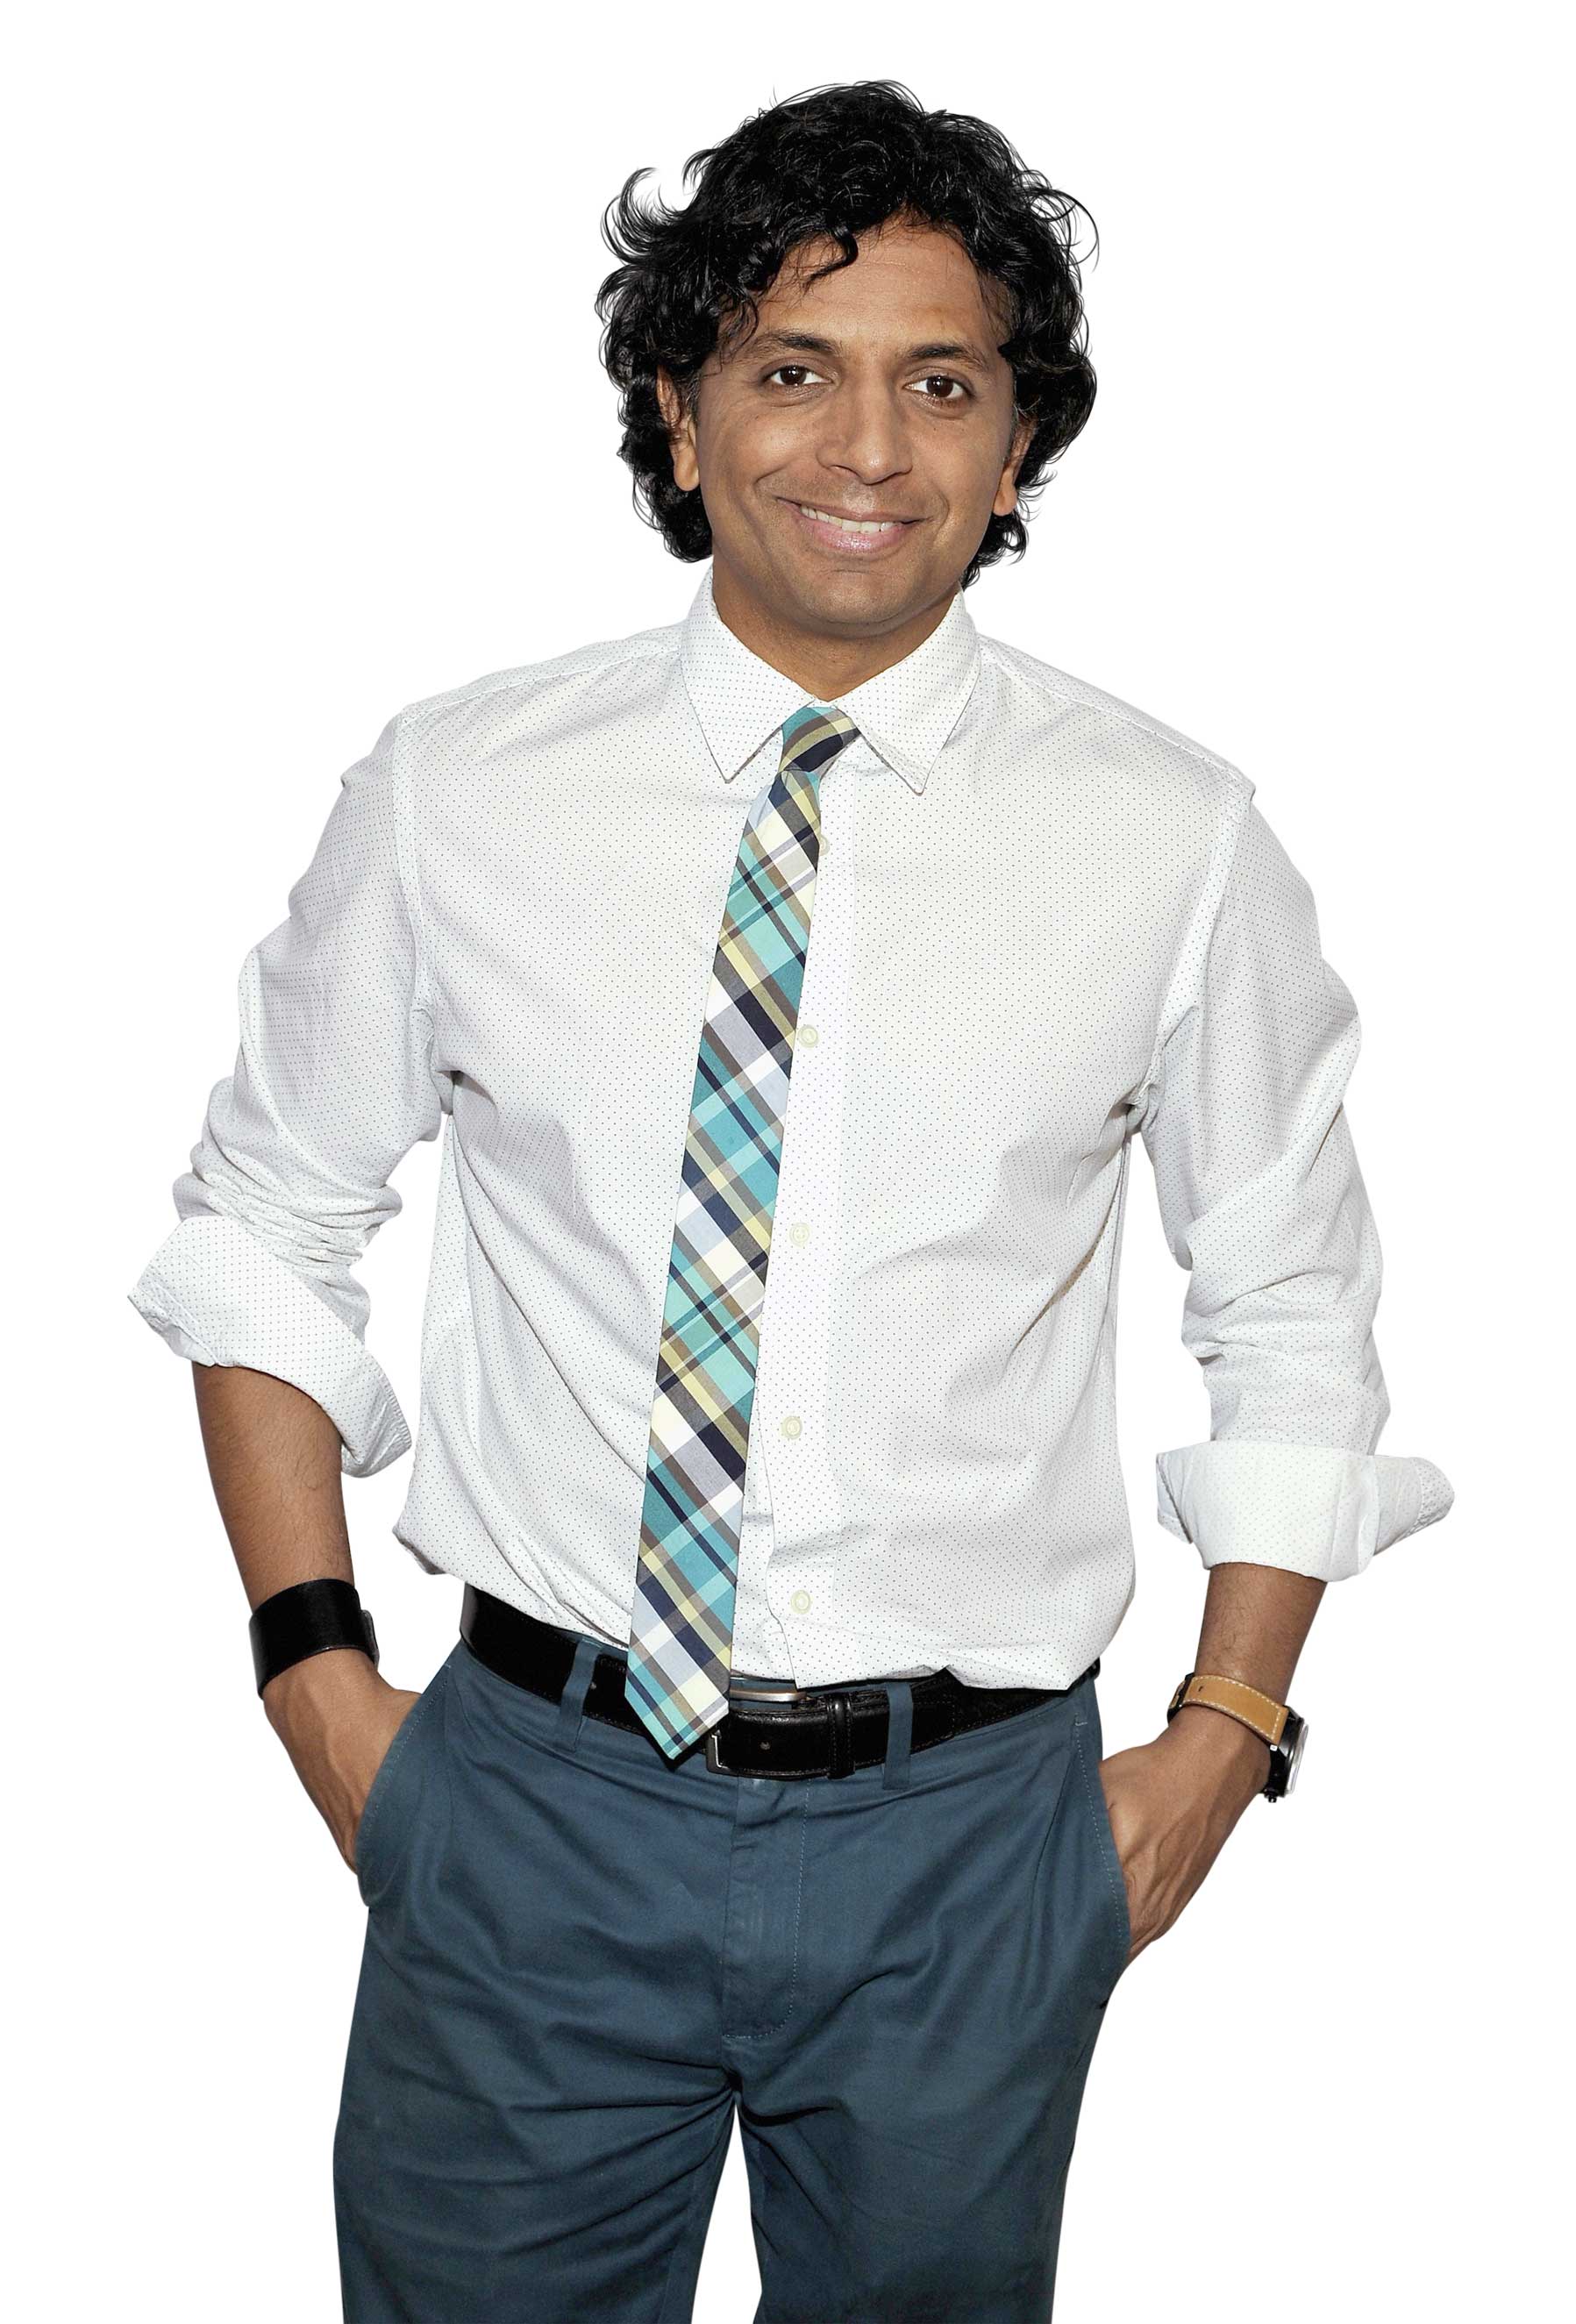 Director M. Night Shyamalan attends WIRED Cafe at Comic Con 2015 in San Diego at Omni Hotel on July 9, 2015 in San Diego, California. (John Sciulli—Getty Images)